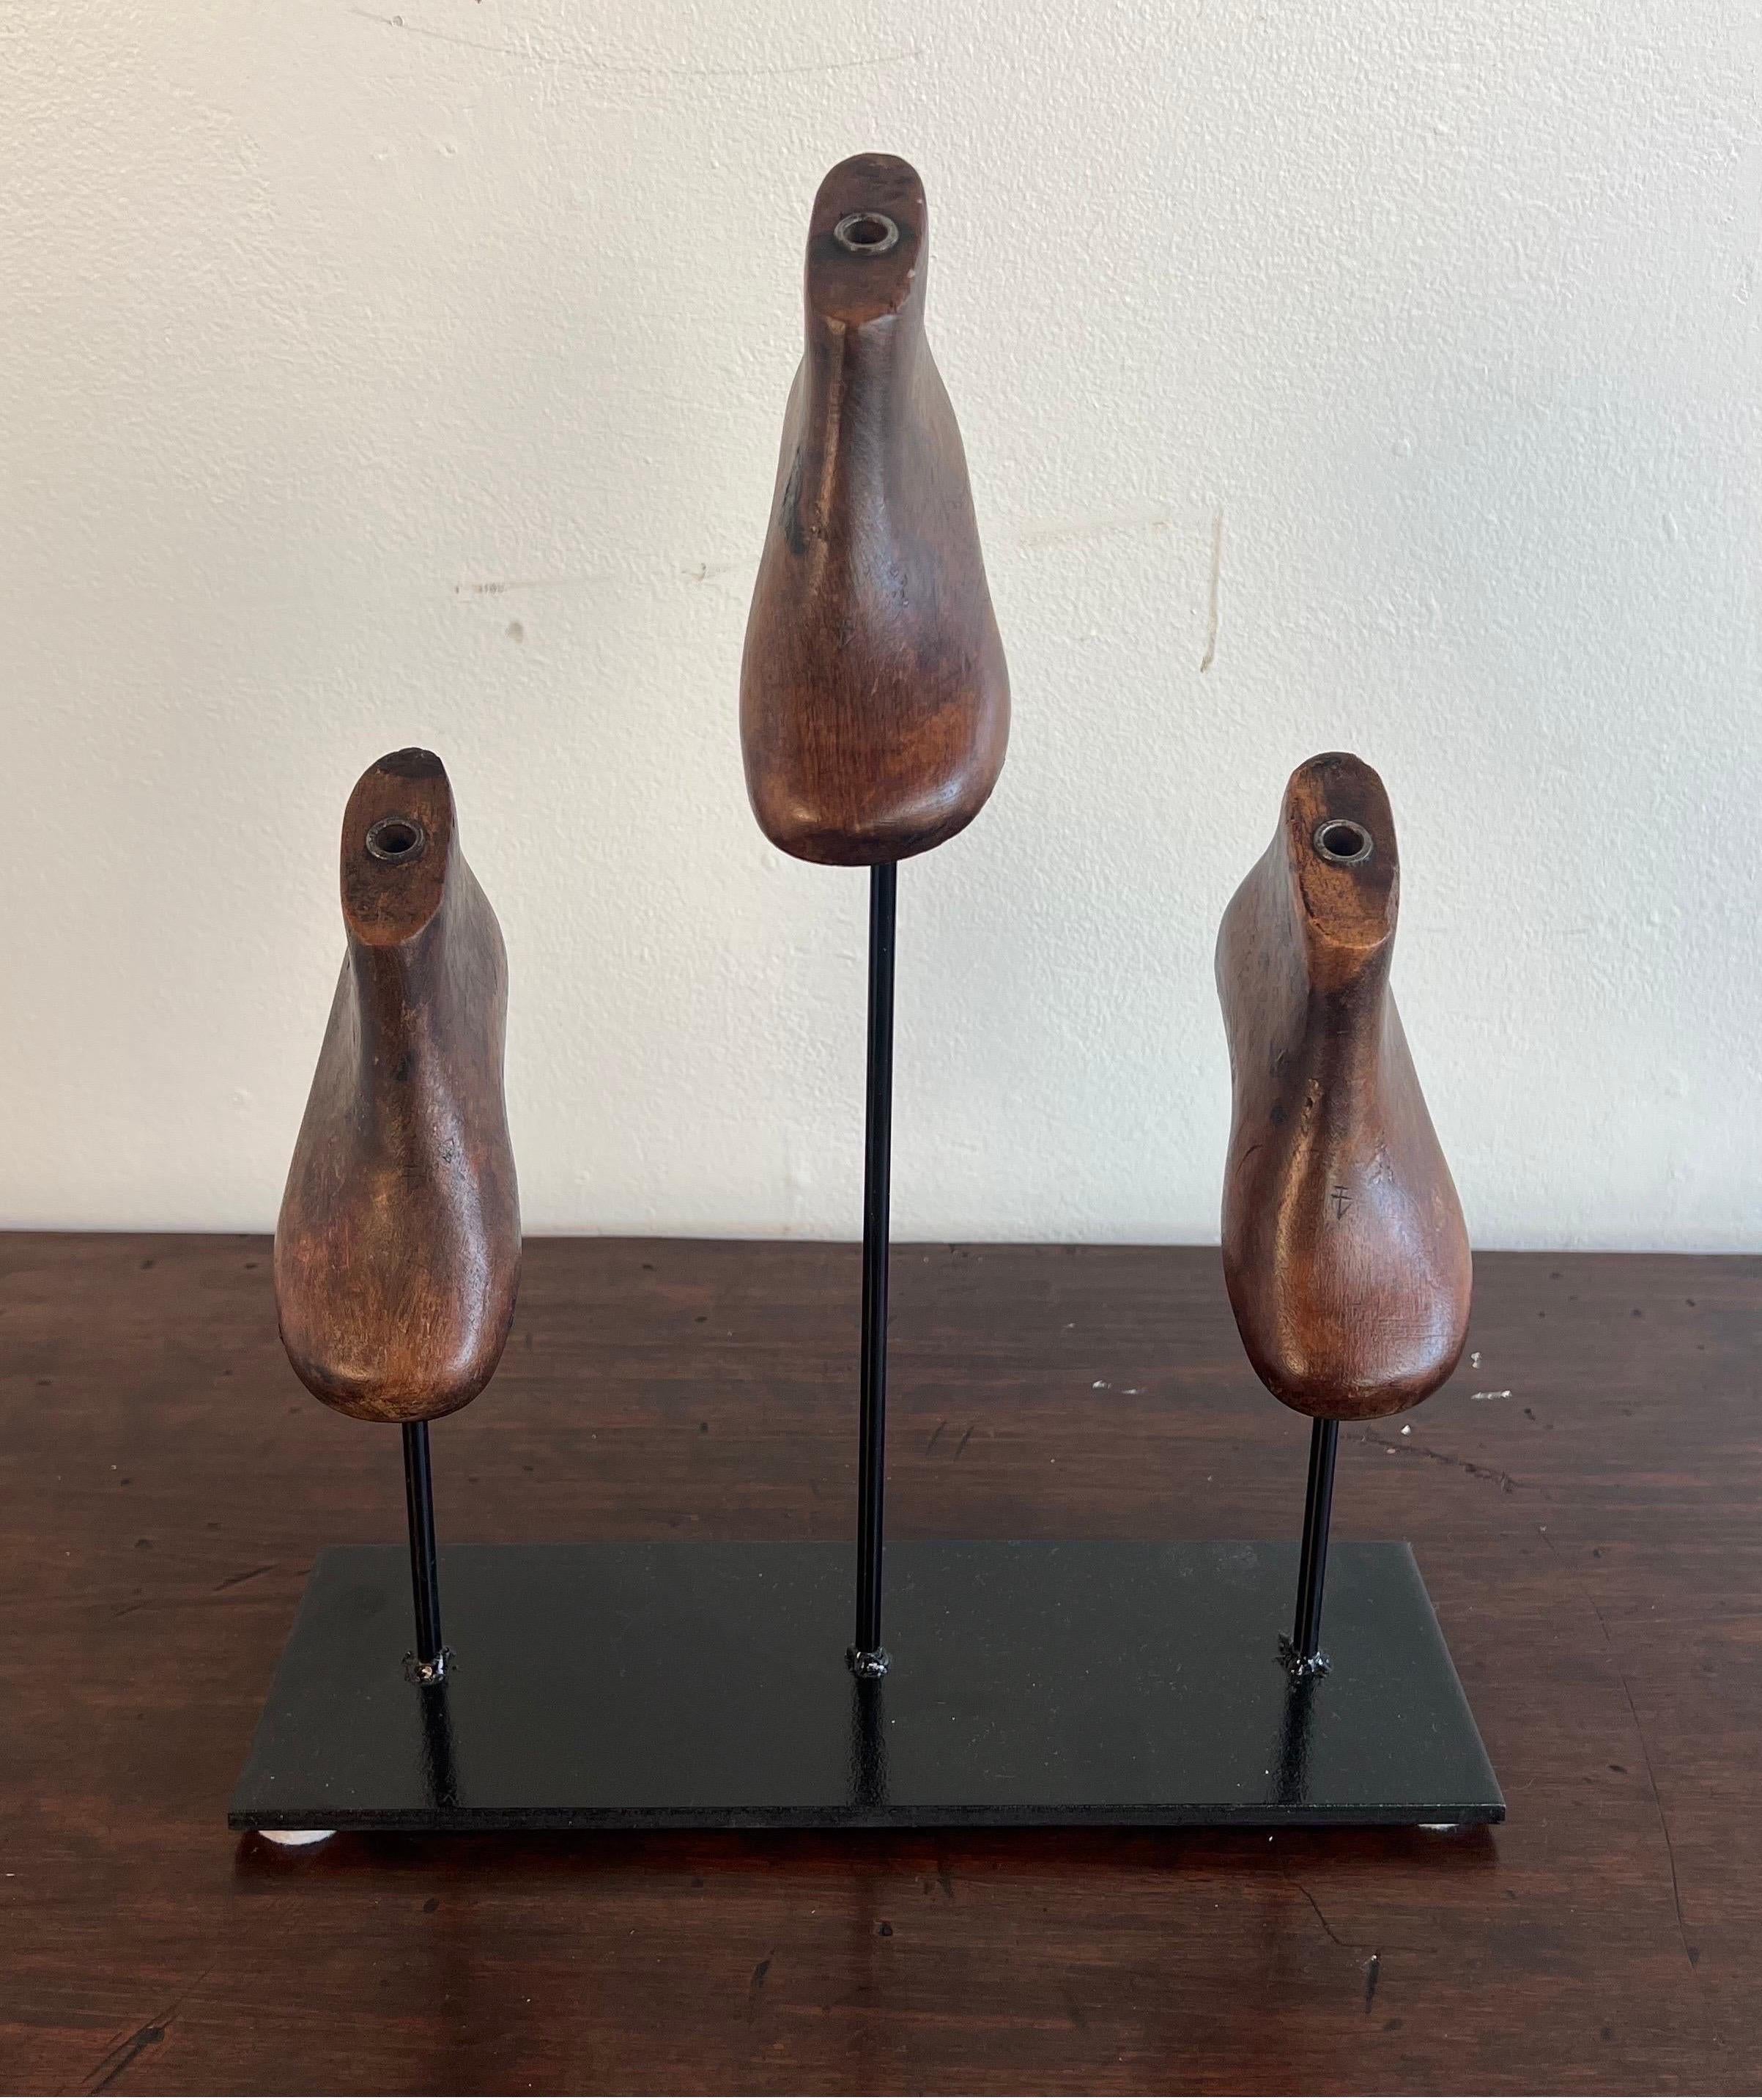 Set of three wooden child size shoe forms mounted on an iron base.